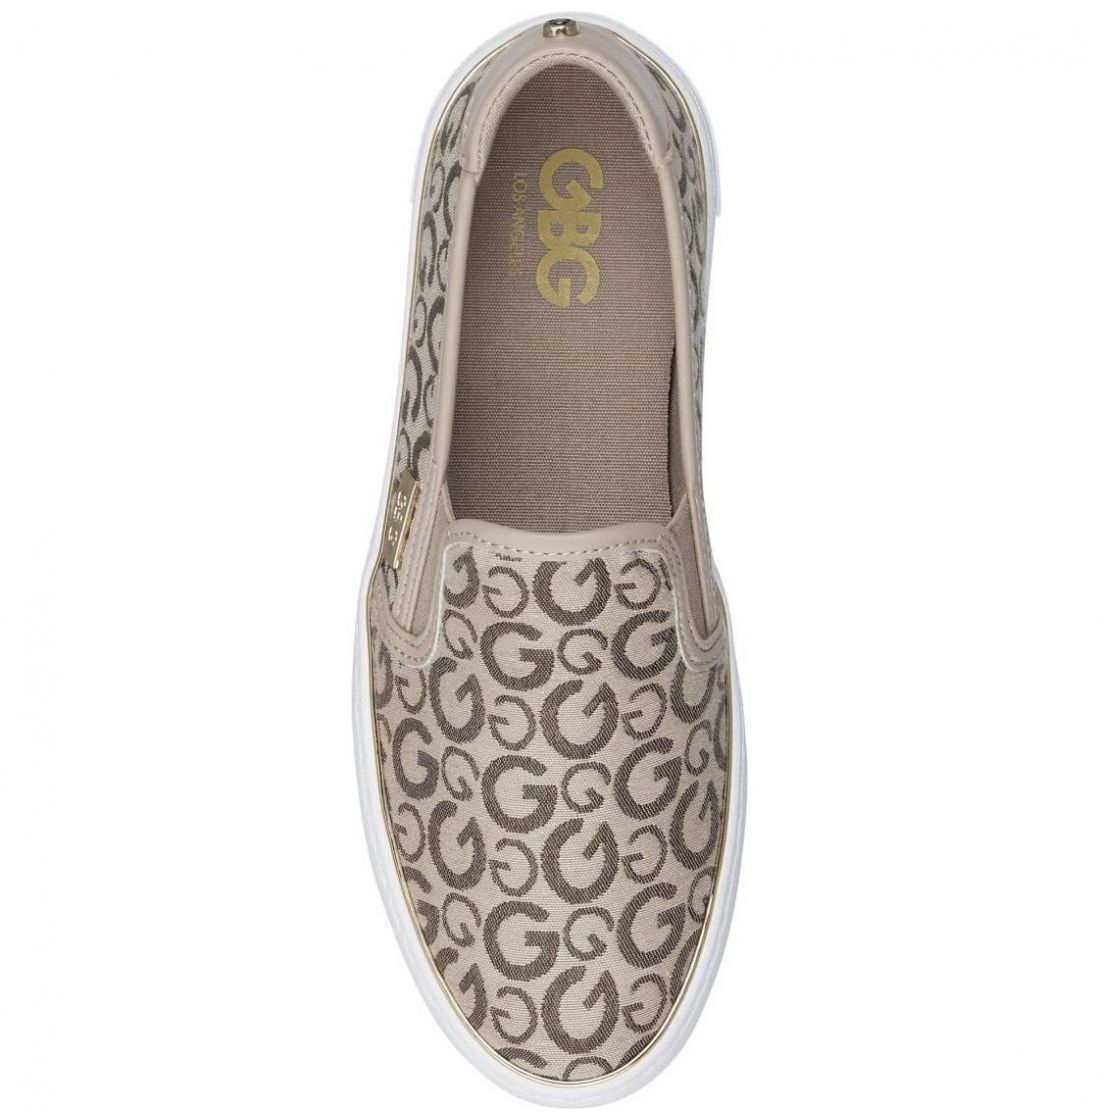 Sneakers G By Guess con Plataforma para Mujer